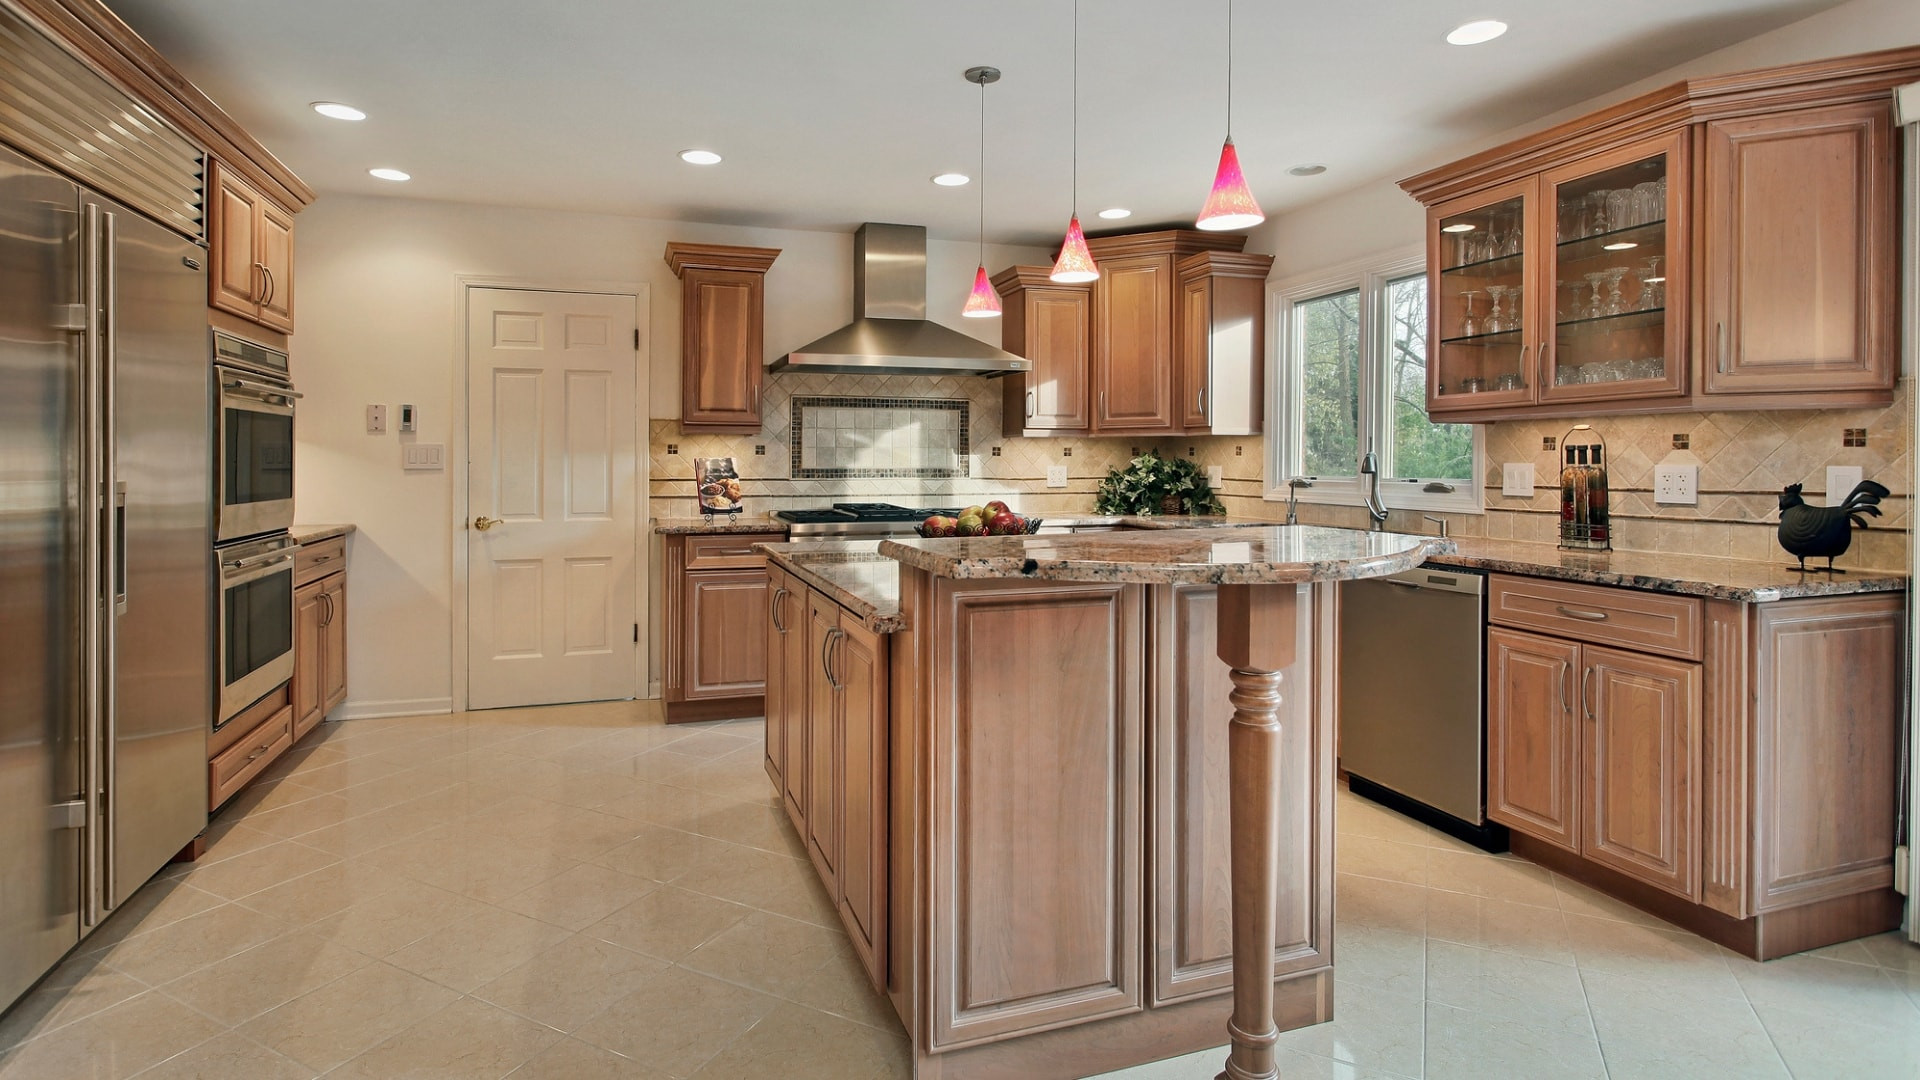 Kitchen Remodel Pricing
 Kitchen Remodeling Costs in Washington D C